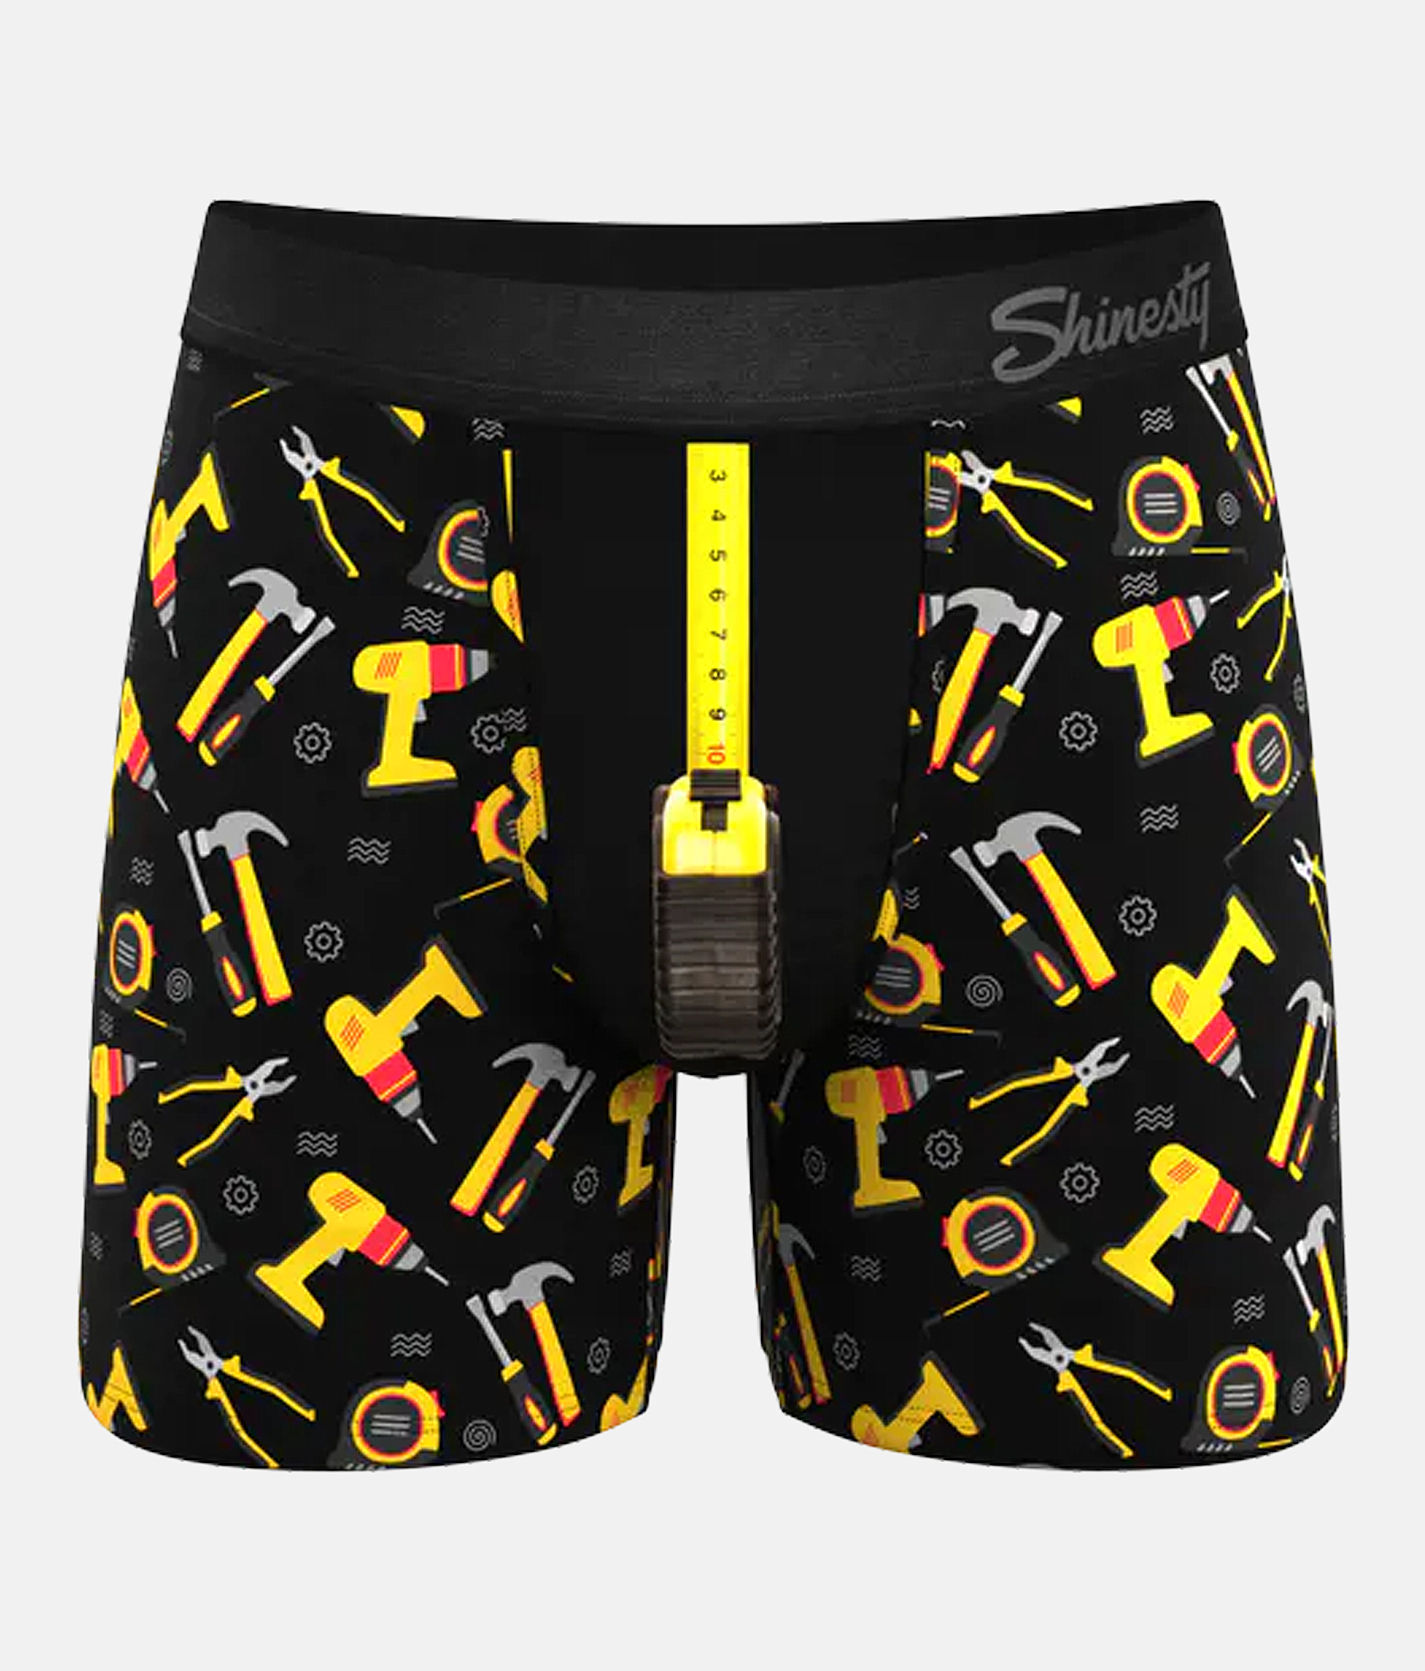 Shinesty® The Tool Kit Stretch Boxer Briefs - Men's Boxers in